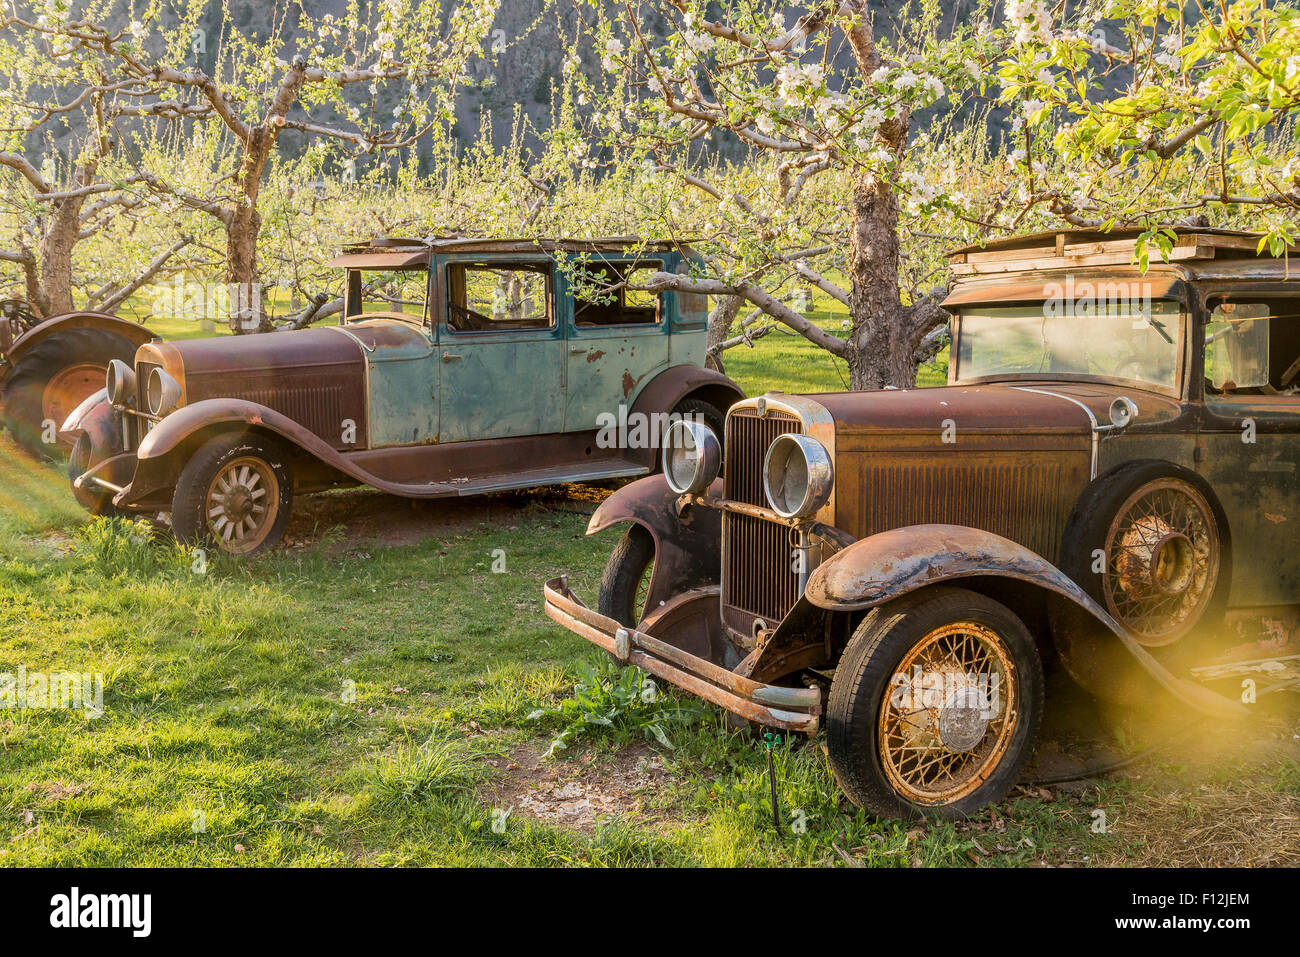 Rusted old vehicles, Parsons Fruit Stand, Keremeos, Similkameen Valley, British Columbia, Canada Stock Photo